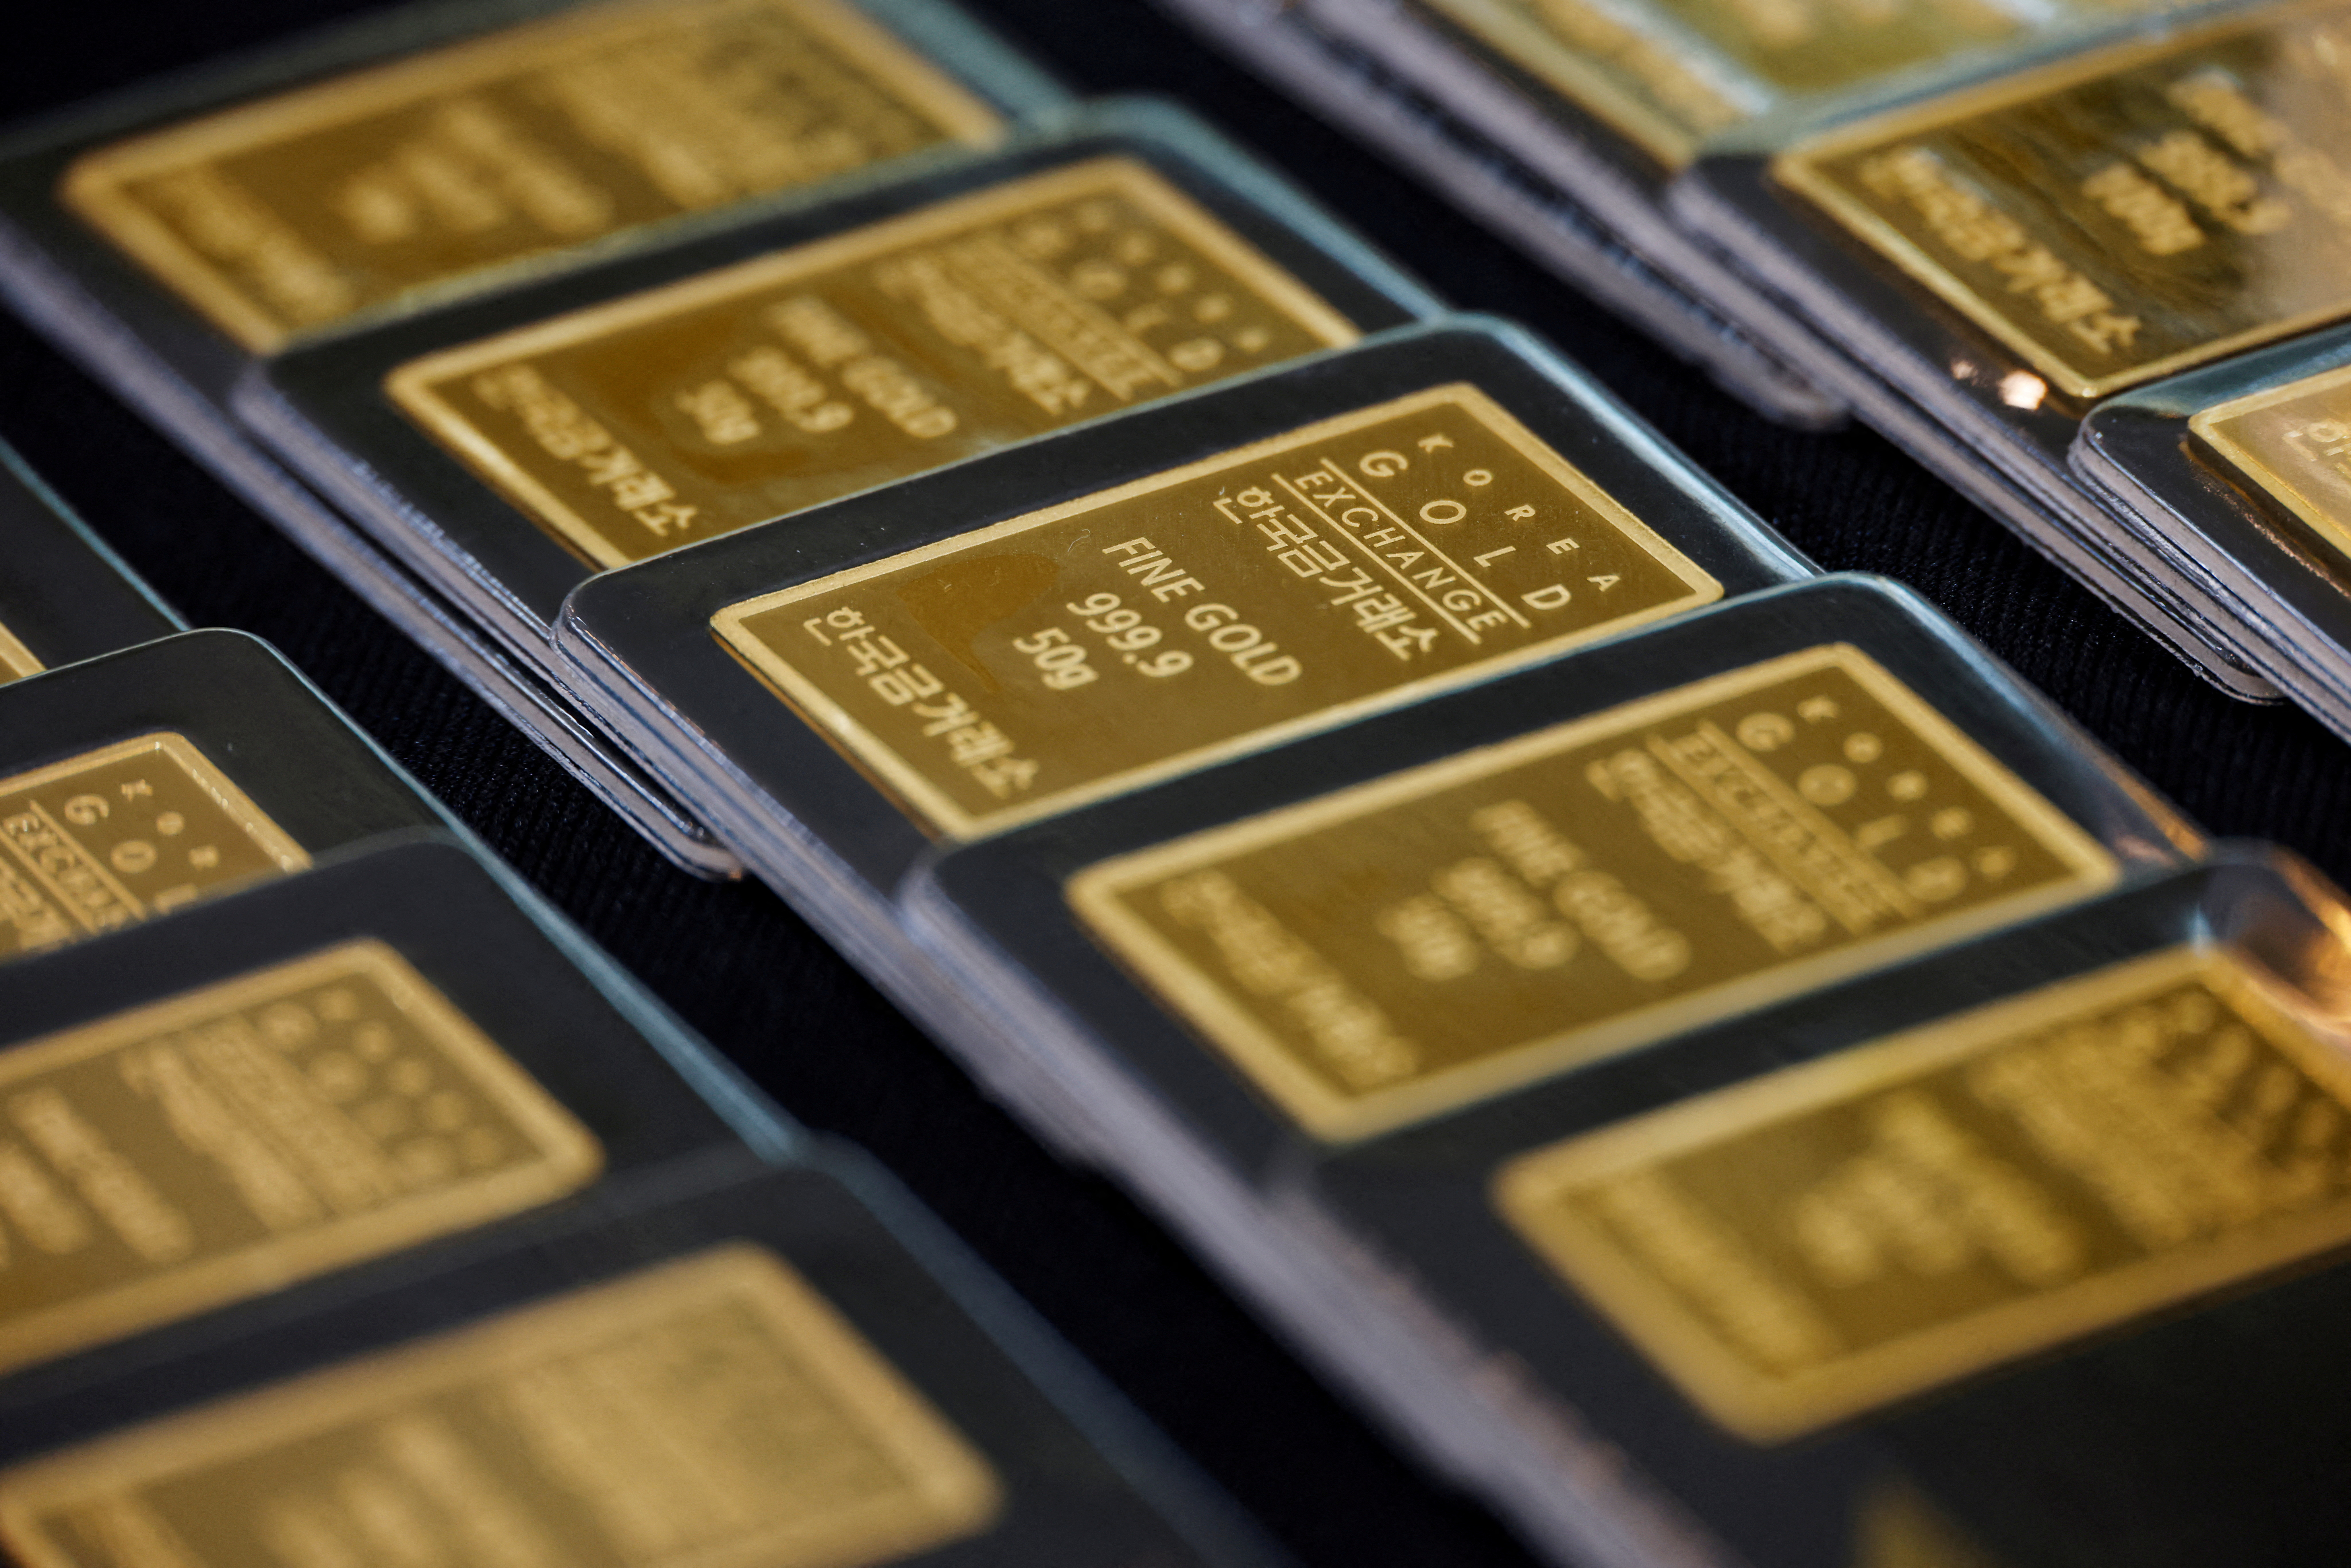 Gold bars are pictured on display at Korea Gold Exchange in Seoul